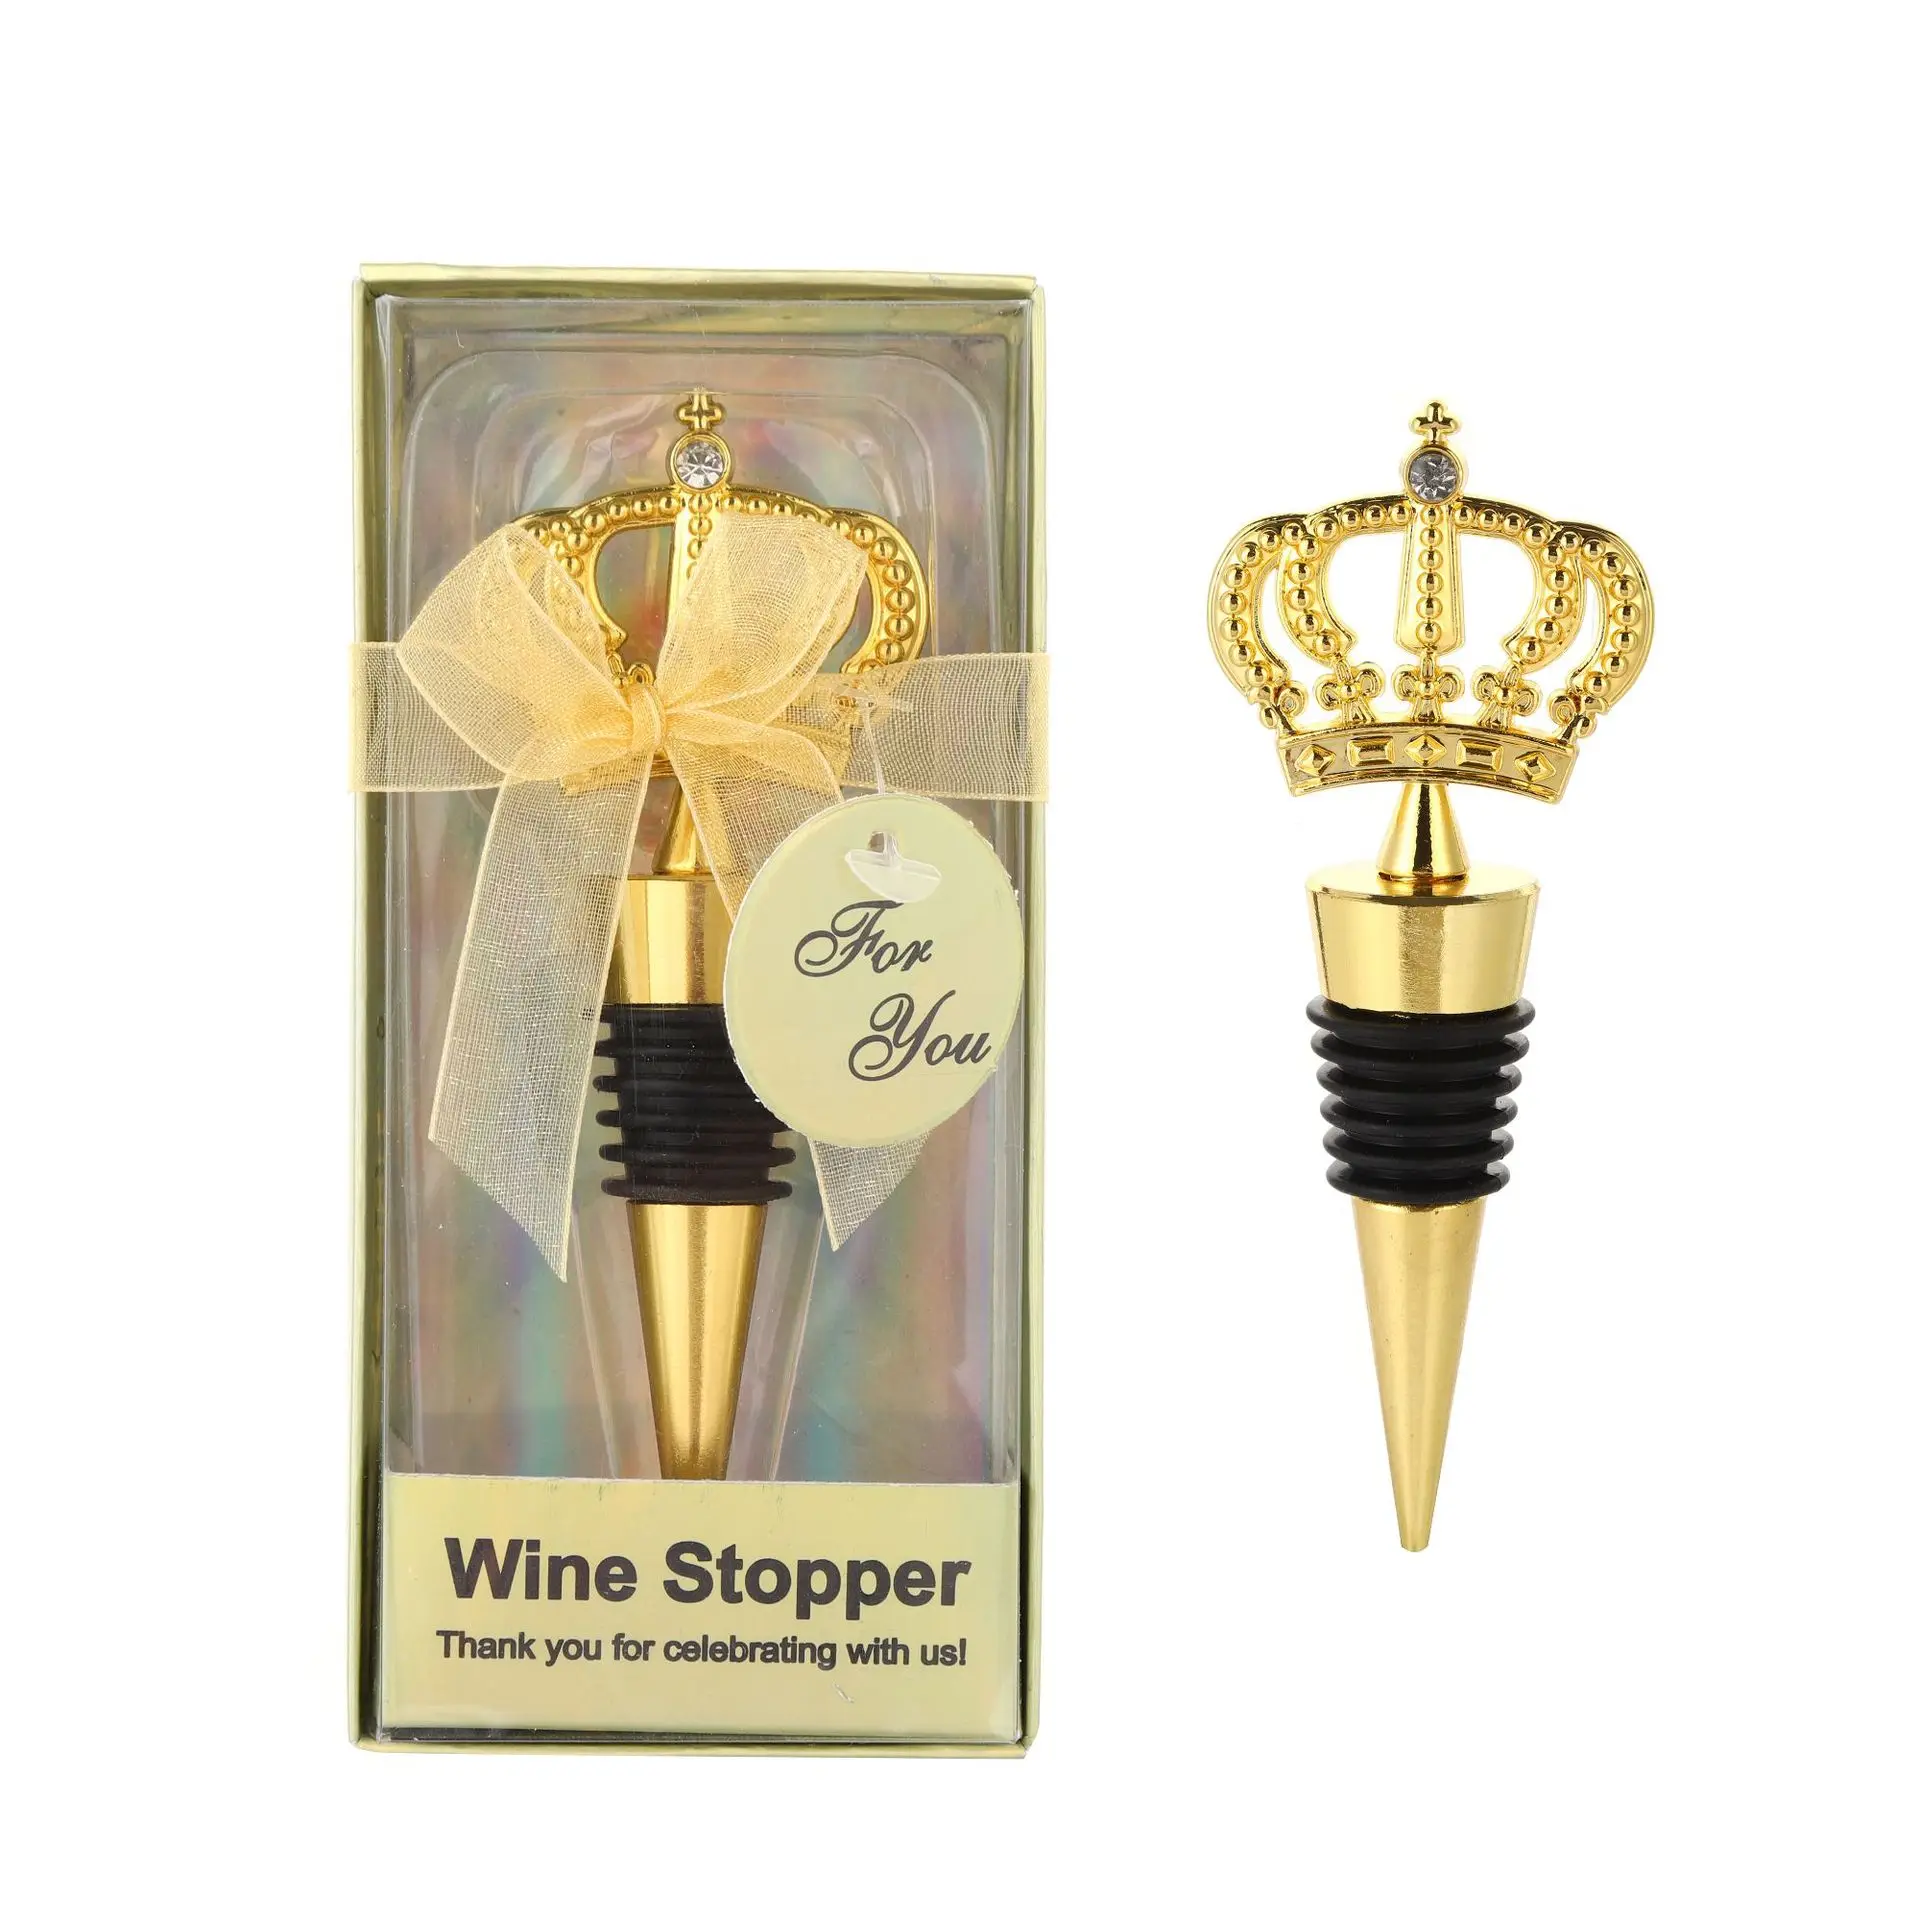 

12 Pcs Crown Wine Stopper Durable Practical Bottle Plugs Sealing Cork Plugs For Wedding Party Gift Birthday Decoration Memento